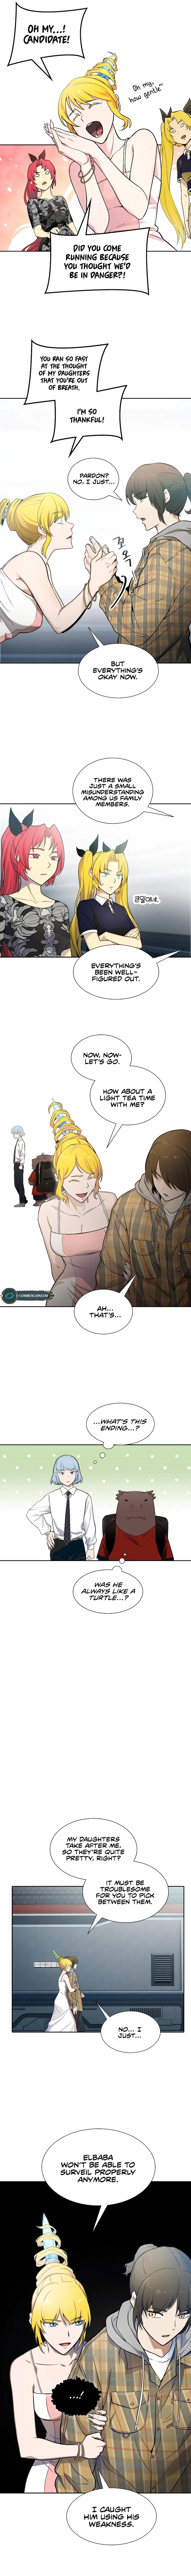 Tower of God Chapter 578 page 25